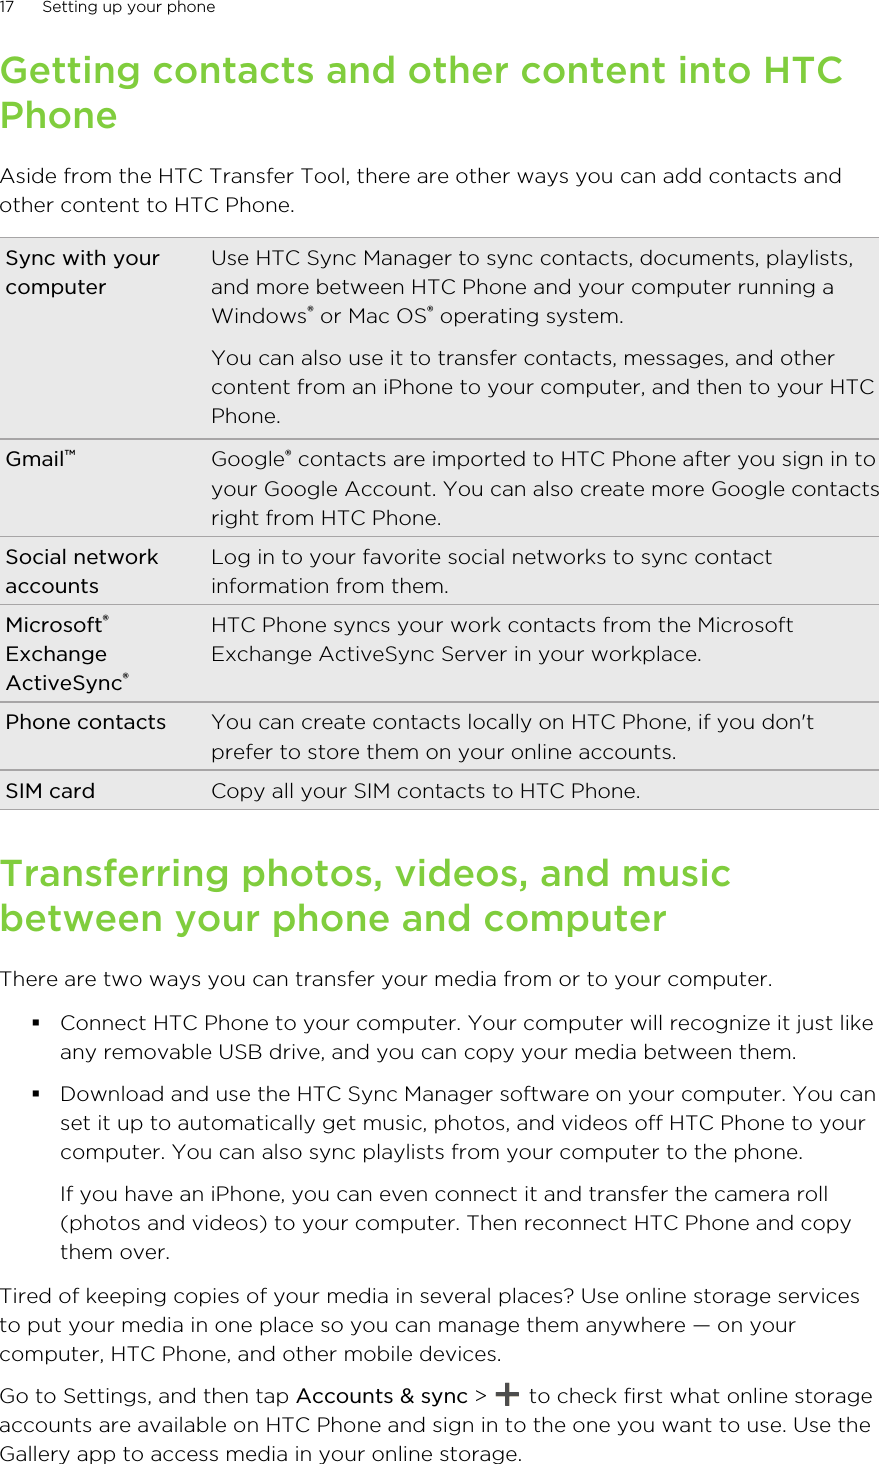 Getting contacts and other content into HTCPhoneAside from the HTC Transfer Tool, there are other ways you can add contacts andother content to HTC Phone.Sync with yourcomputerUse HTC Sync Manager to sync contacts, documents, playlists,and more between HTC Phone and your computer running aWindows® or Mac OS® operating system.You can also use it to transfer contacts, messages, and othercontent from an iPhone to your computer, and then to your HTCPhone.Gmail™Google® contacts are imported to HTC Phone after you sign in toyour Google Account. You can also create more Google contactsright from HTC Phone.Social networkaccountsLog in to your favorite social networks to sync contactinformation from them.Microsoft®ExchangeActiveSync®HTC Phone syncs your work contacts from the MicrosoftExchange ActiveSync Server in your workplace.Phone contacts You can create contacts locally on HTC Phone, if you don&apos;tprefer to store them on your online accounts.SIM card Copy all your SIM contacts to HTC Phone.Transferring photos, videos, and musicbetween your phone and computerThere are two ways you can transfer your media from or to your computer.§Connect HTC Phone to your computer. Your computer will recognize it just likeany removable USB drive, and you can copy your media between them.§Download and use the HTC Sync Manager software on your computer. You canset it up to automatically get music, photos, and videos off HTC Phone to yourcomputer. You can also sync playlists from your computer to the phone.If you have an iPhone, you can even connect it and transfer the camera roll(photos and videos) to your computer. Then reconnect HTC Phone and copythem over.Tired of keeping copies of your media in several places? Use online storage servicesto put your media in one place so you can manage them anywhere — on yourcomputer, HTC Phone, and other mobile devices.Go to Settings, and then tap Accounts &amp; sync &gt;   to check first what online storageaccounts are available on HTC Phone and sign in to the one you want to use. Use theGallery app to access media in your online storage.17 Setting up your phone